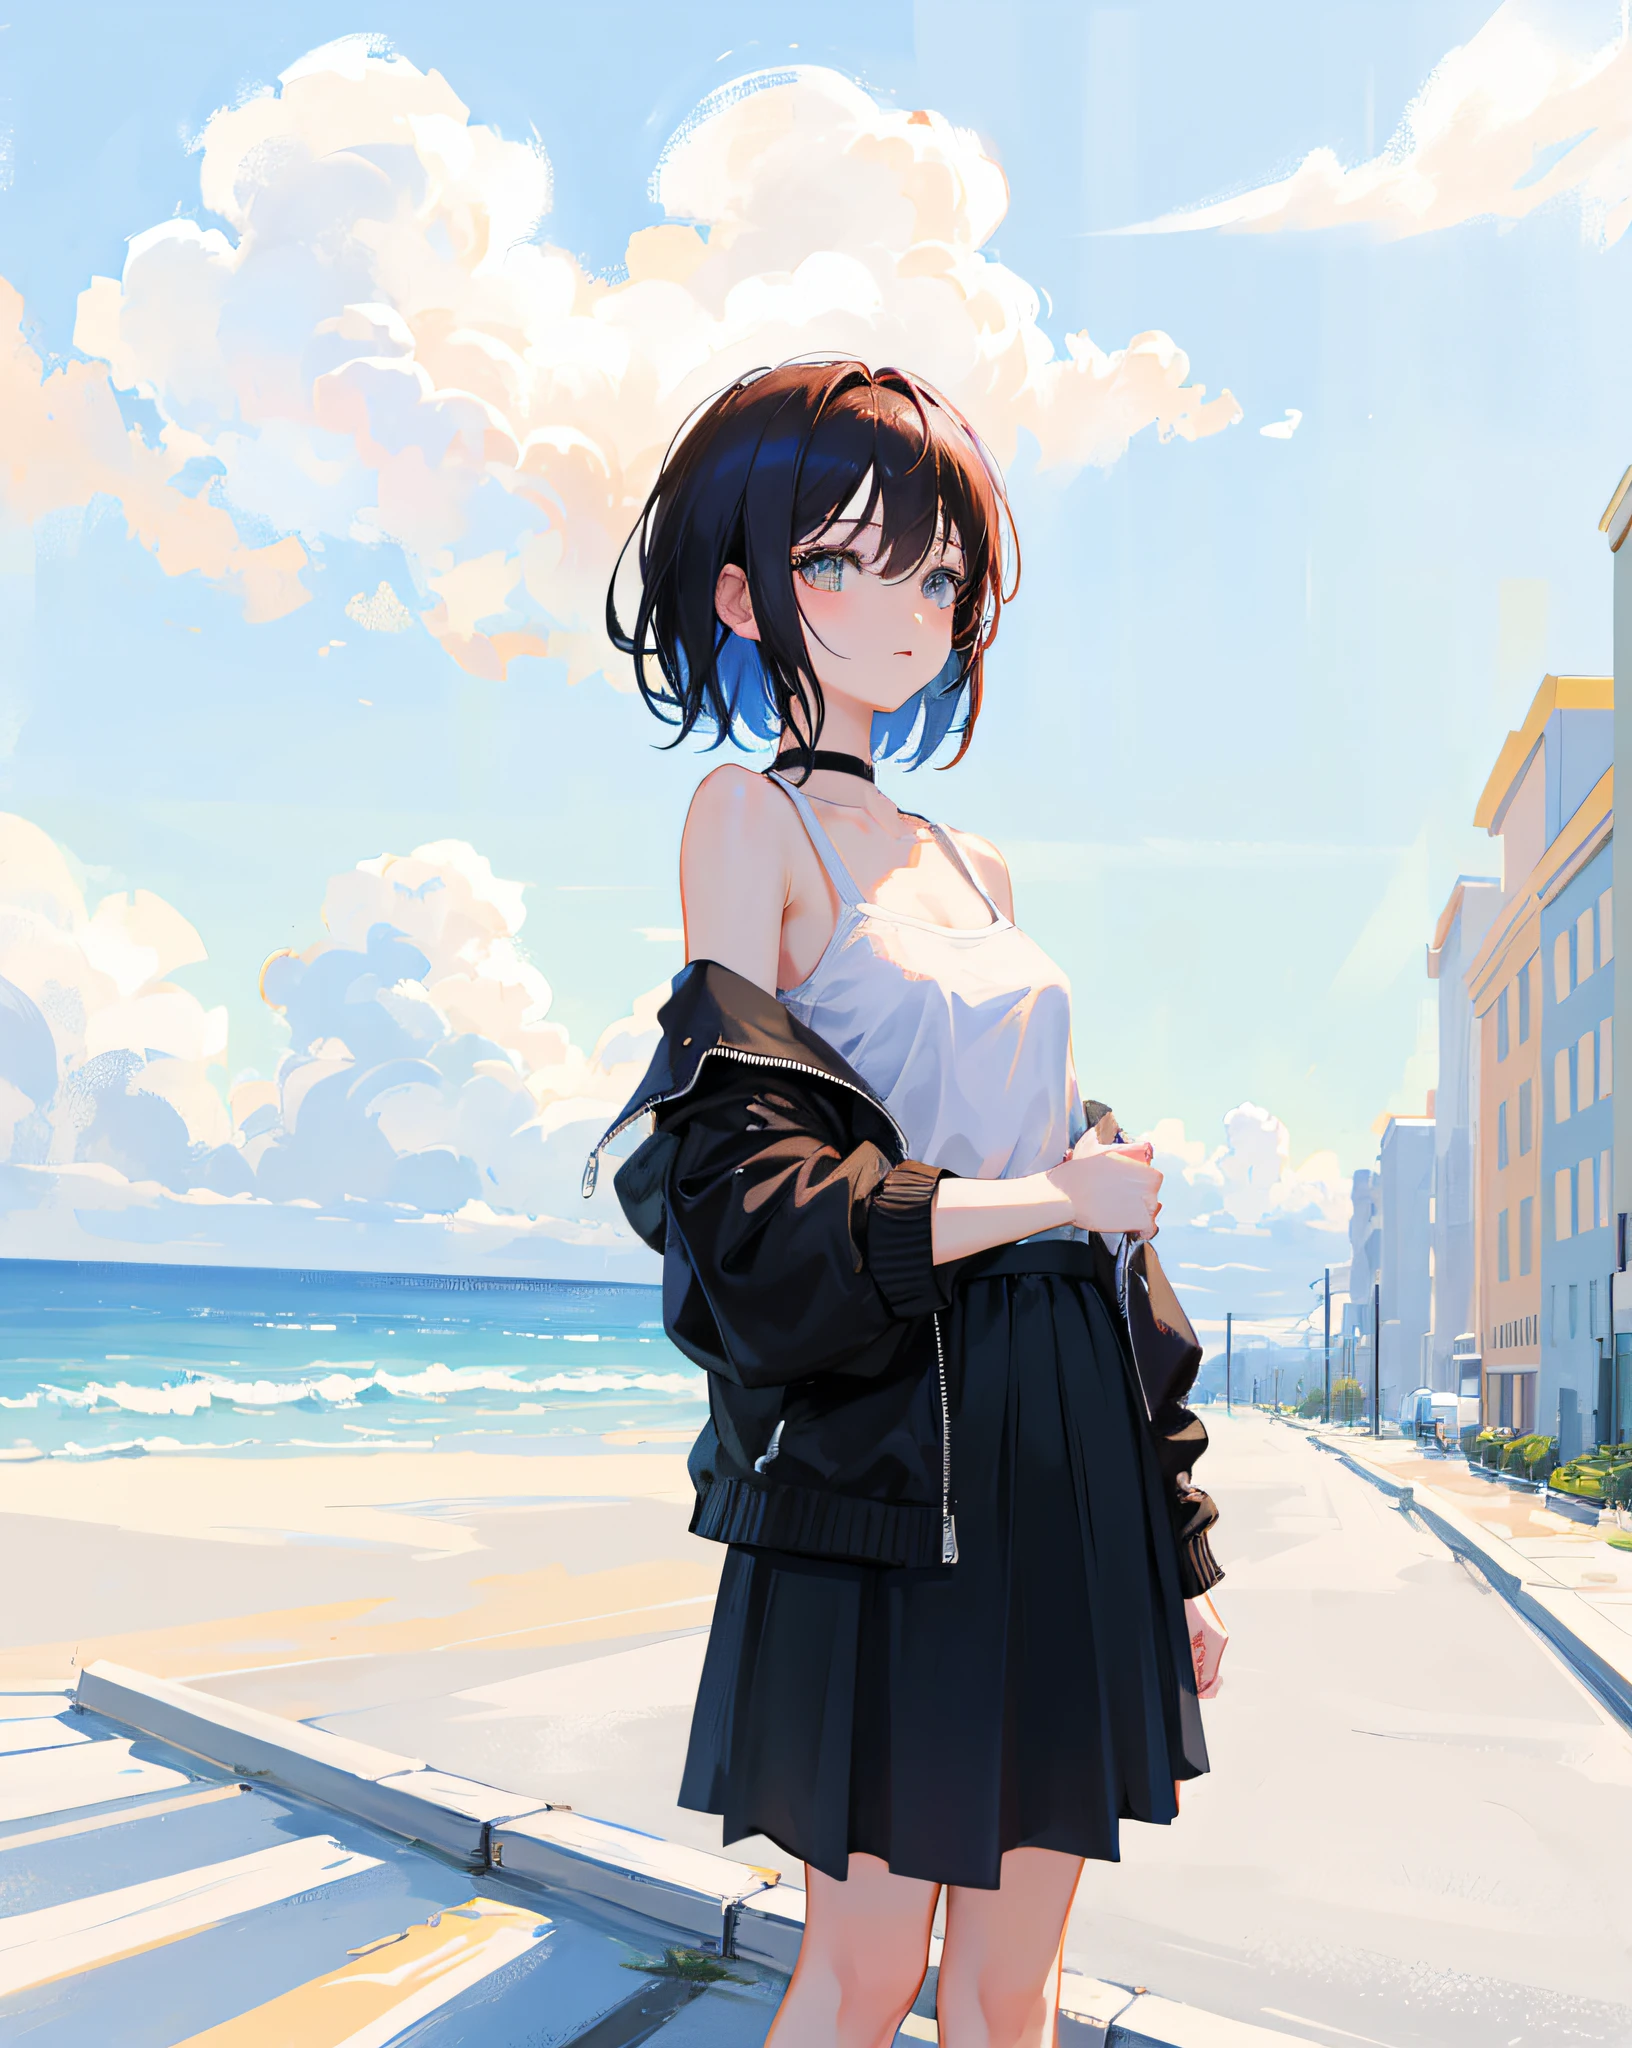 (Realistic painting style:1.0), Masterpiece, Best quality, absurderes, comic strip, illustration,
1 girl, medium hair, cute girl, young and cute girl, Korean girl, {Breasts}, kuan17, 
a girl in black top and grey skirt standing on street, wearing black camisole outfit, cute kawaii girl, photo of slim girl model, wearing a chocker, simple clothes, simple clothing, blue sky, sexy,